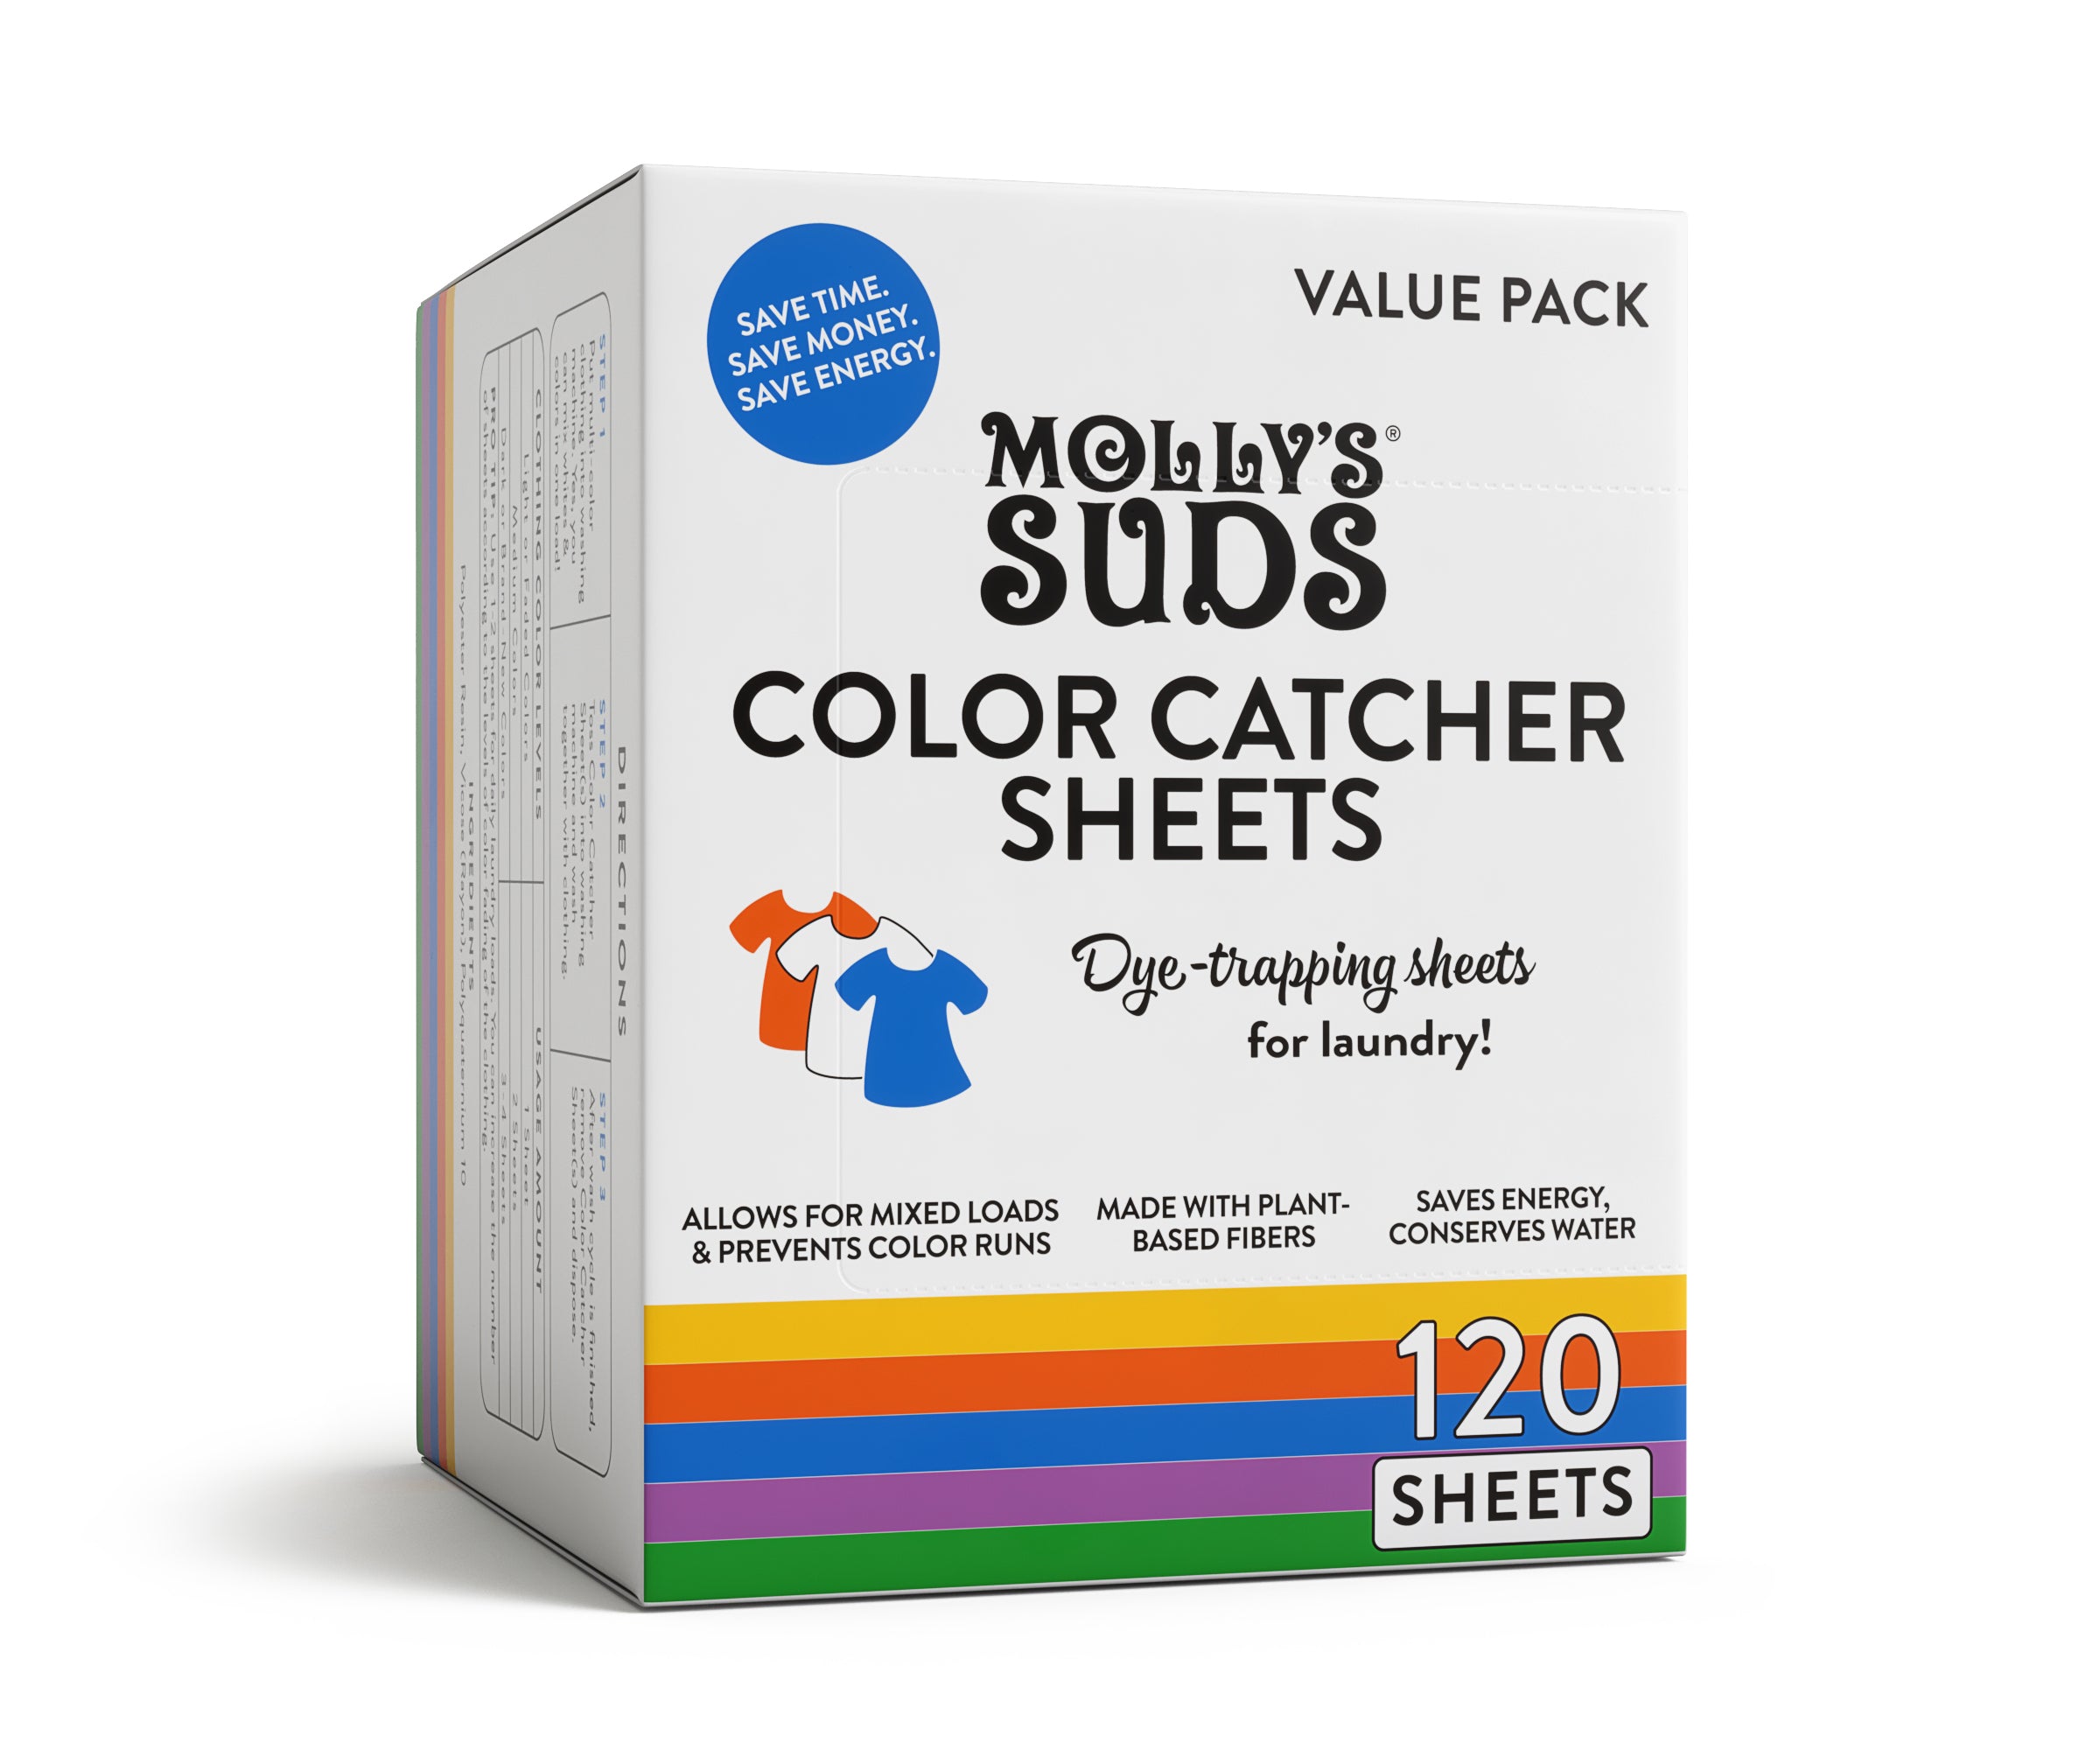  Shout Color Catcher Sheets for Laundry, Allow Mixed